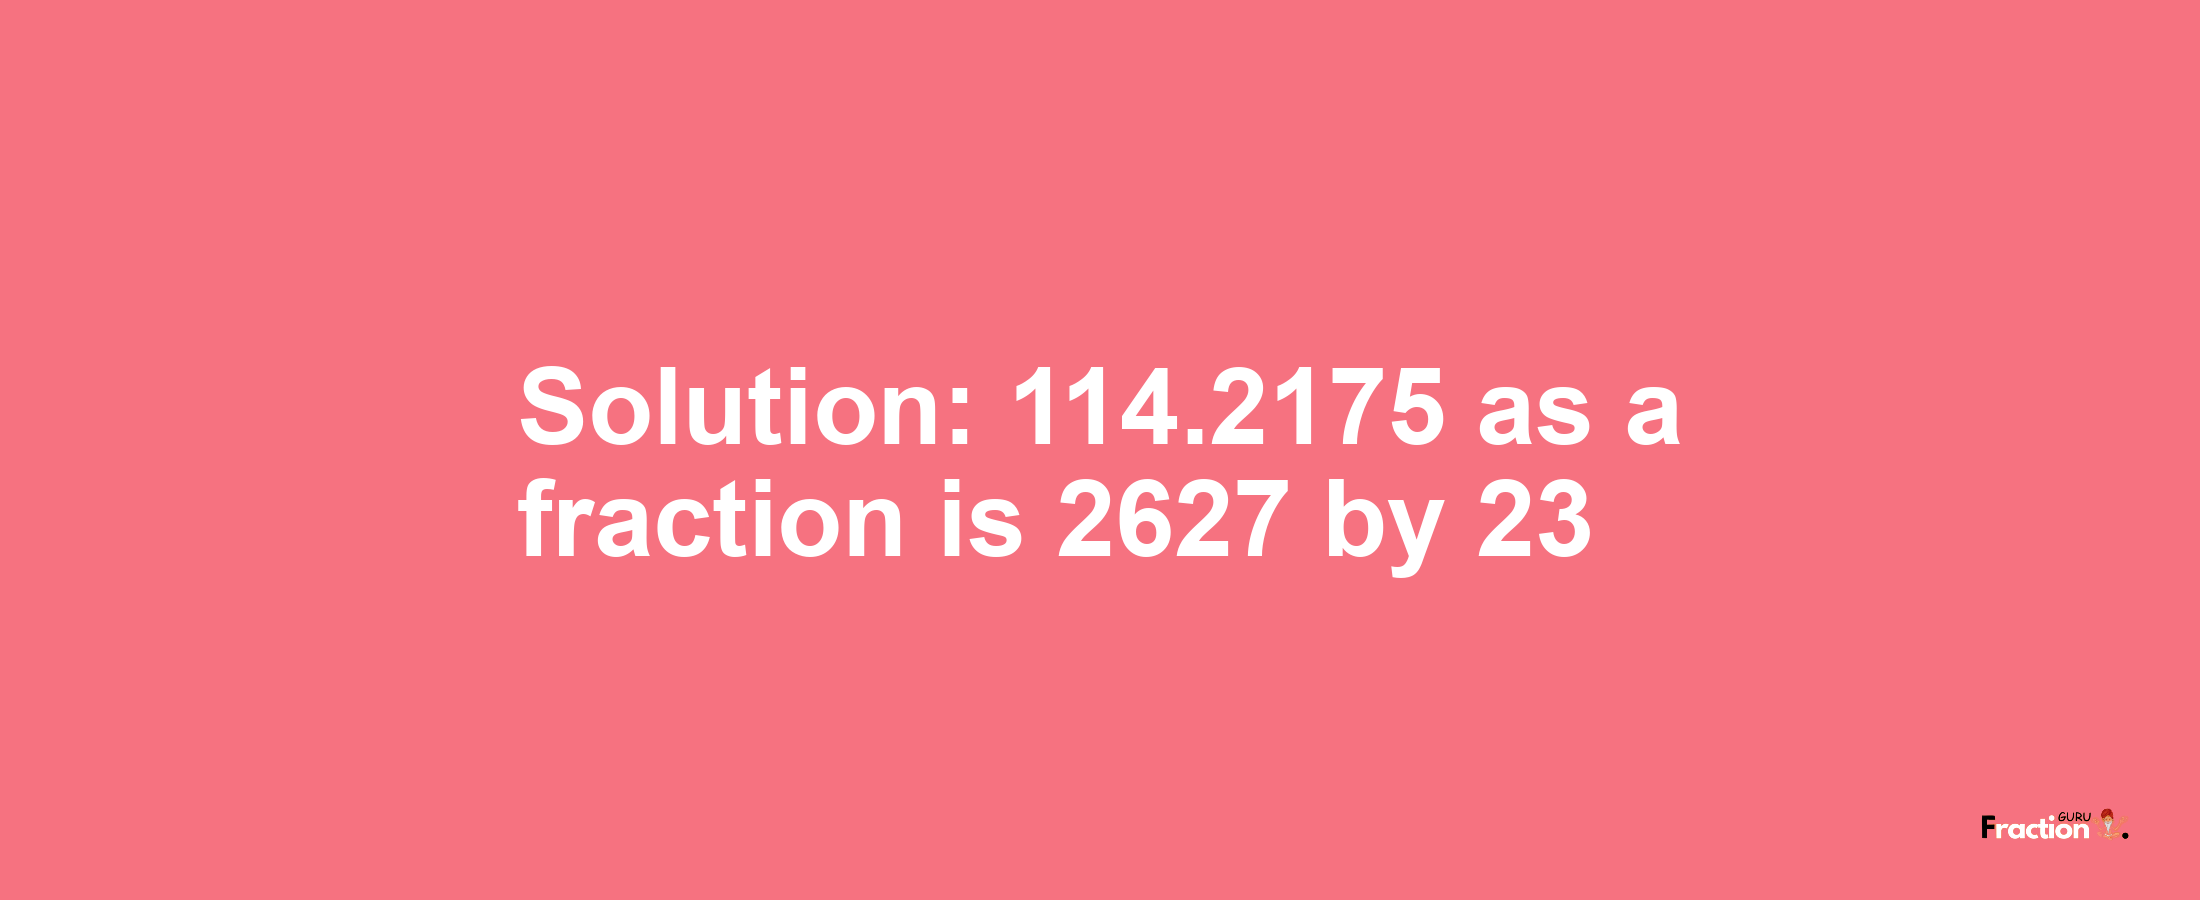 Solution:114.2175 as a fraction is 2627/23